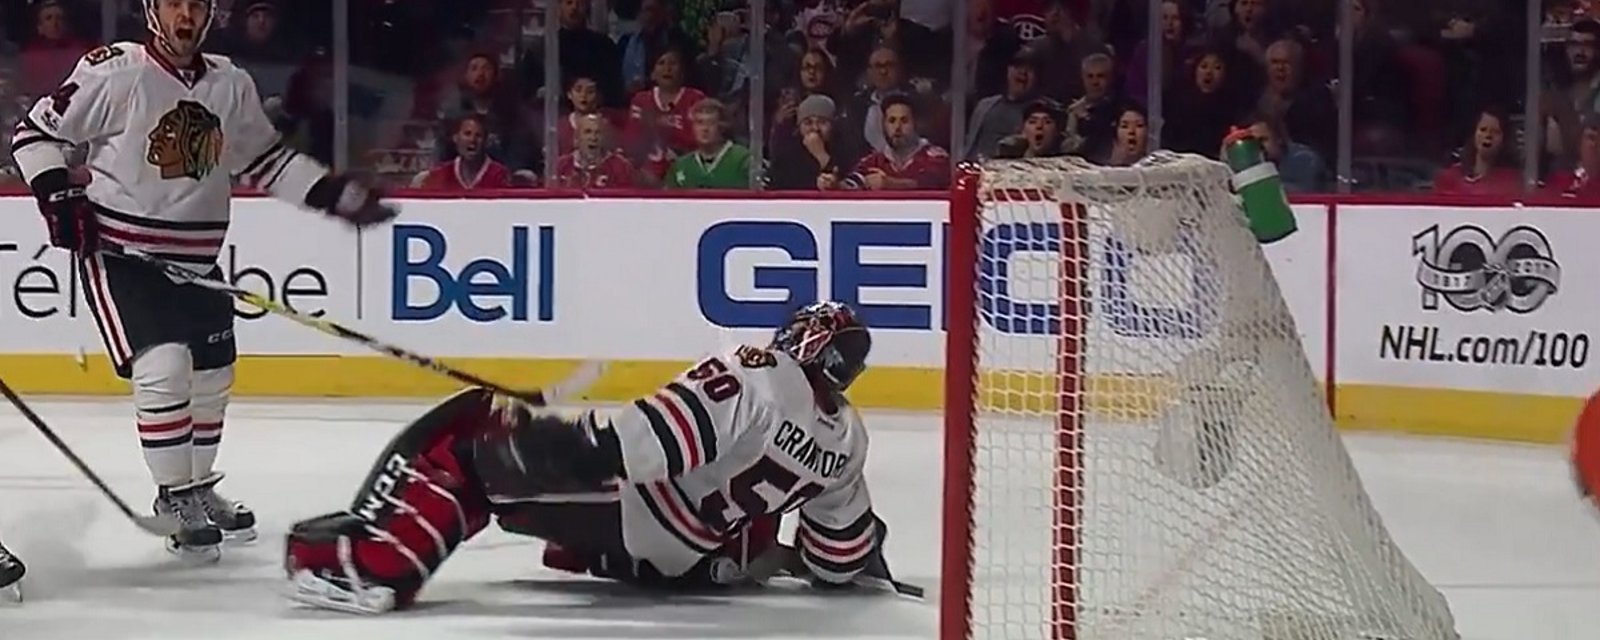 Corey Crawford gets rocked by a headshot from Shea Weber.